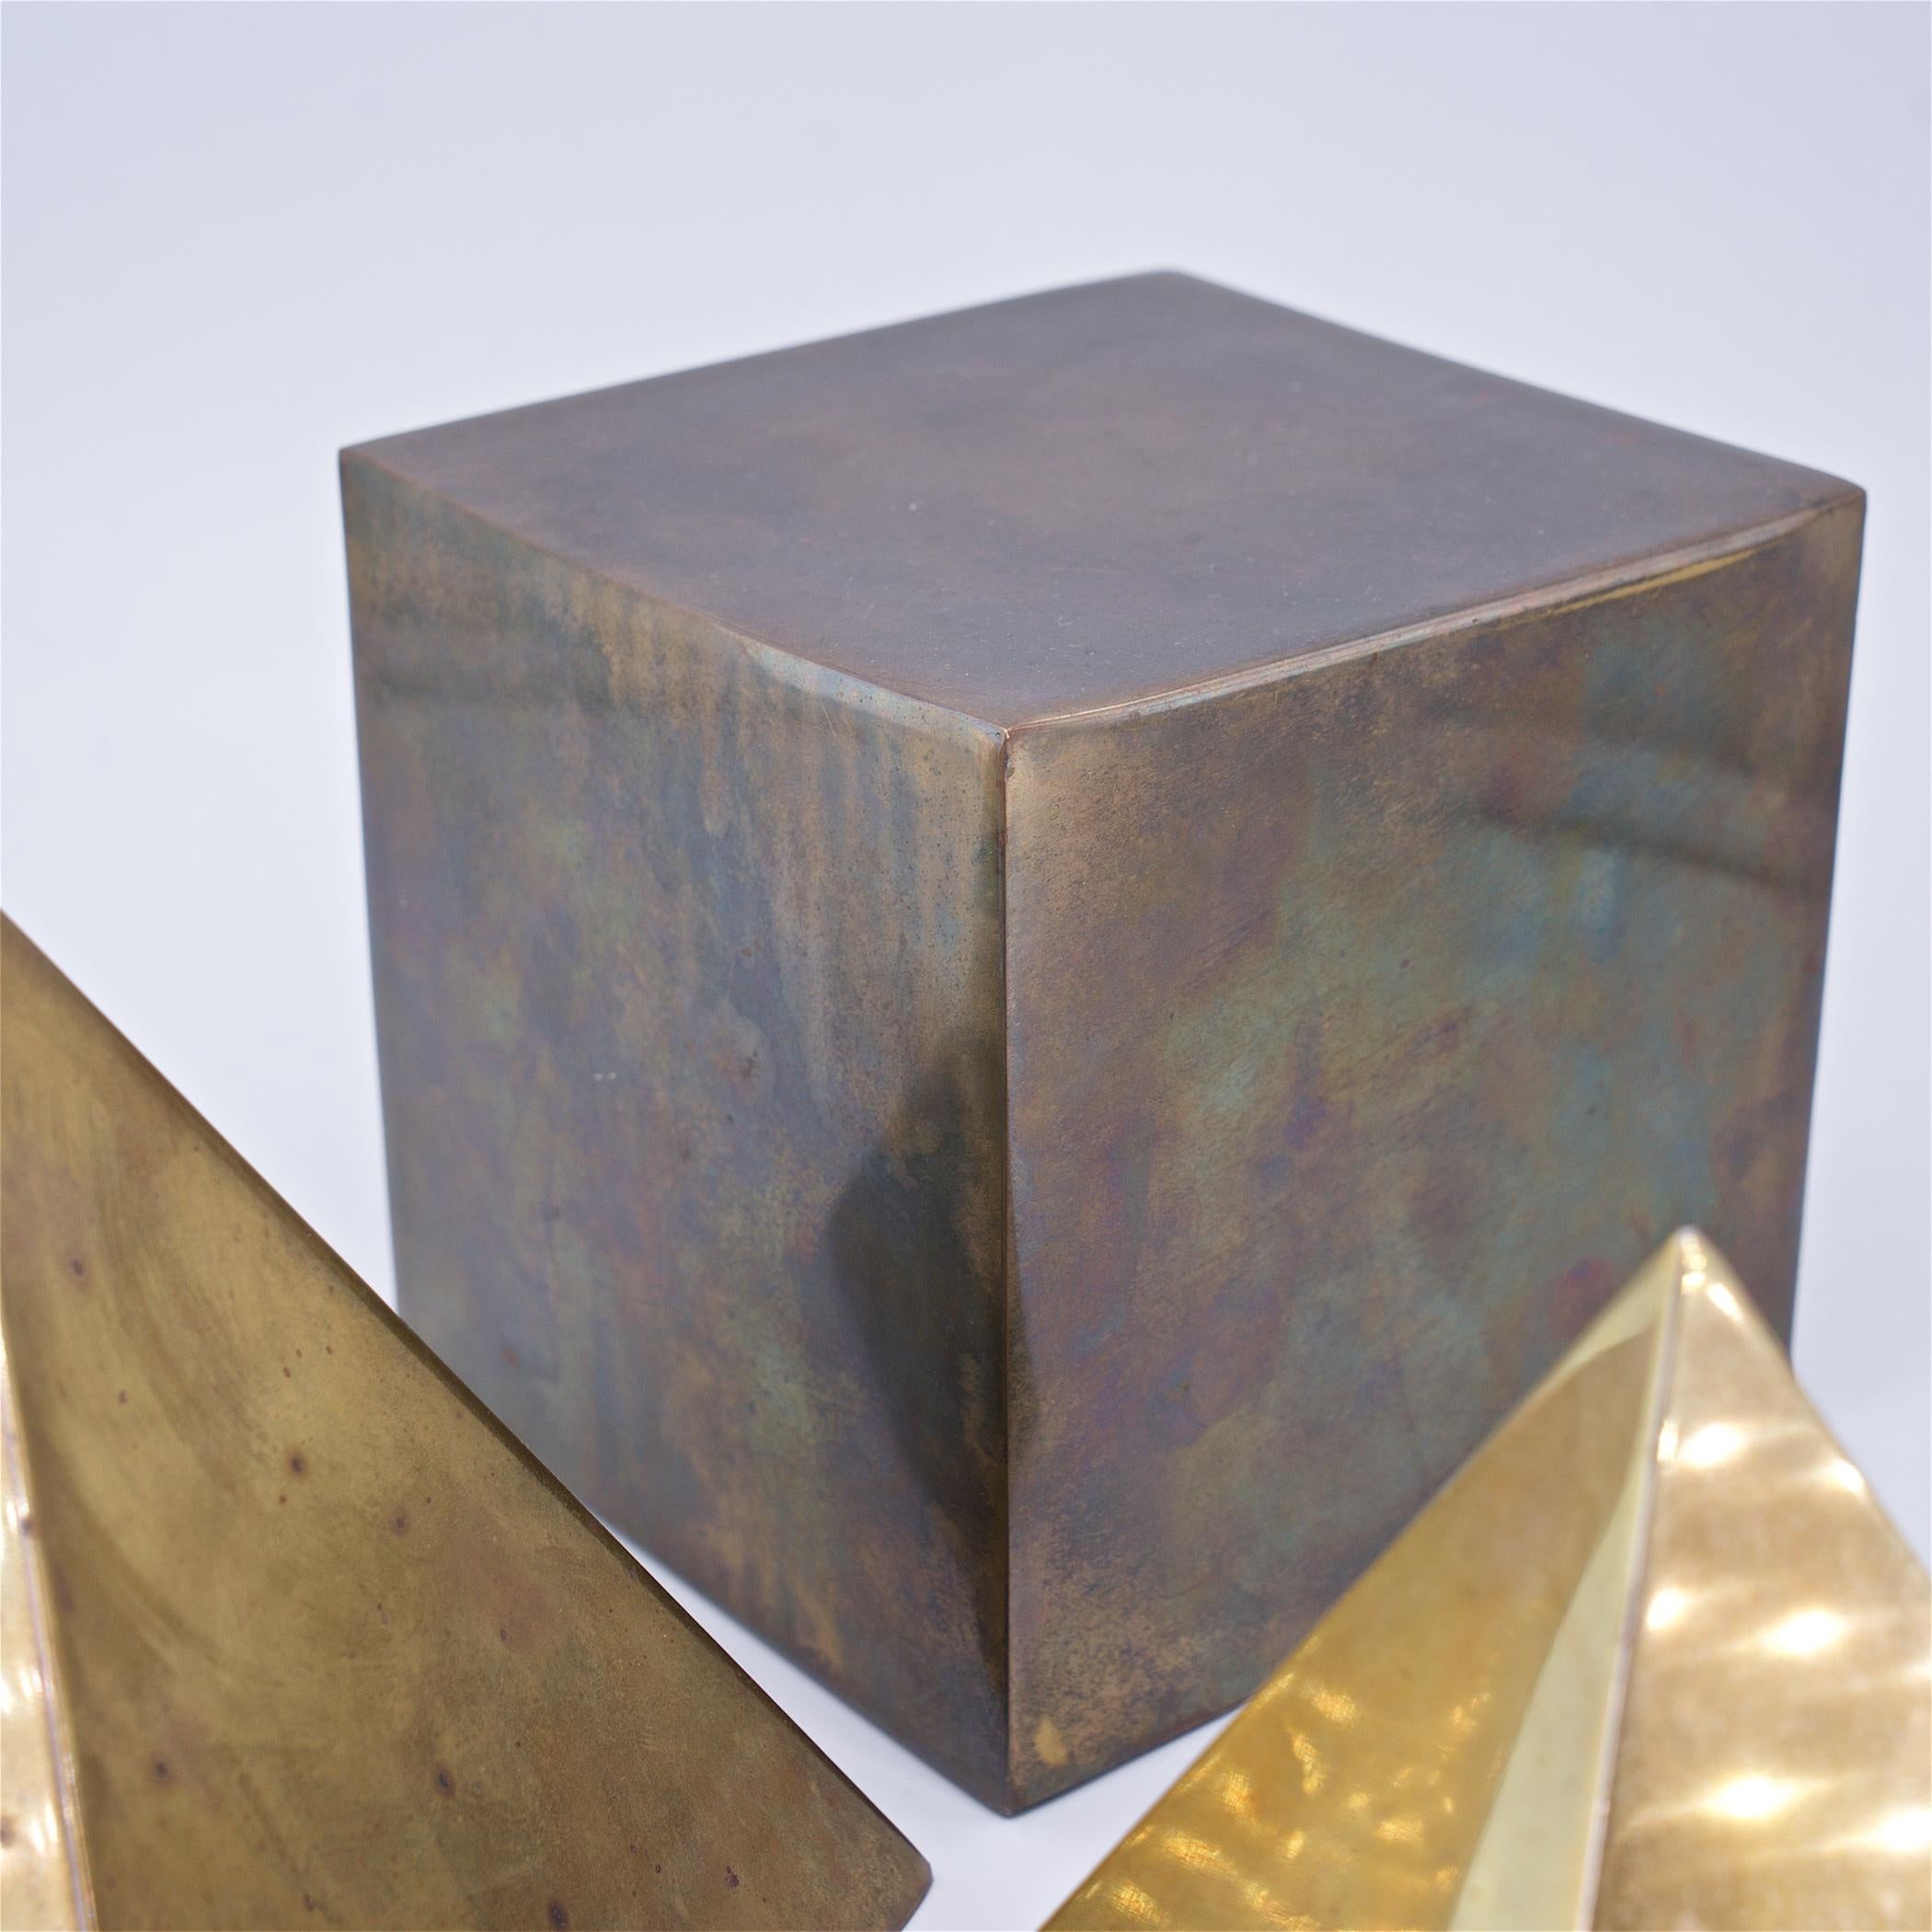 Polished Vintage 1970s Brass Geometric Table Sculptures Pyramid Cube Mid-Century, Italy For Sale